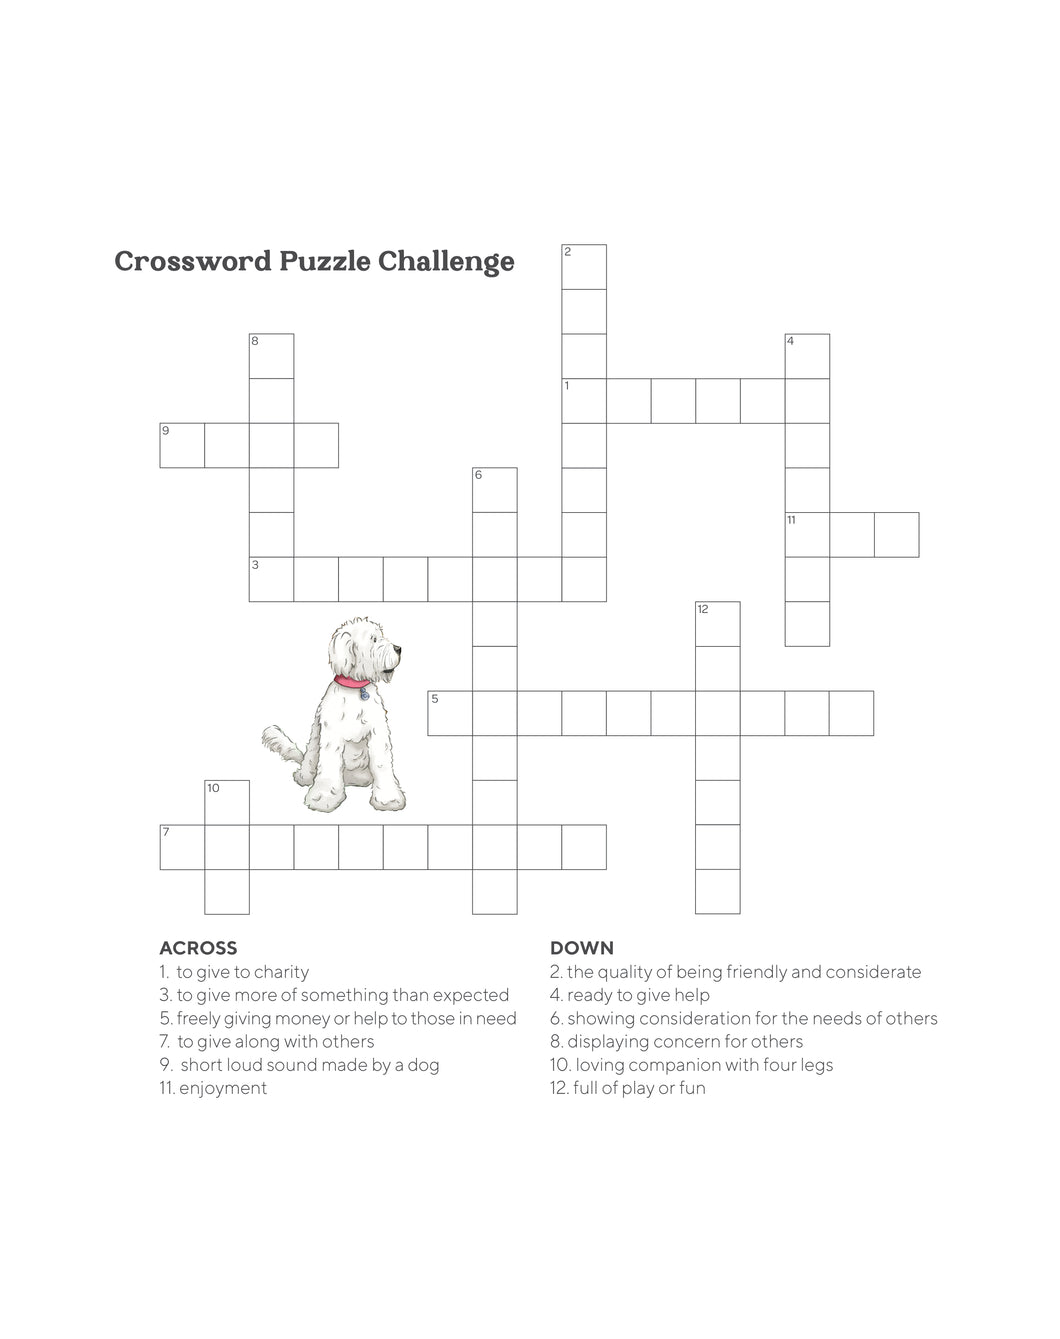 Crossword Puzzle Challenge with cute white dog illustration. There are six words going across and six words going down